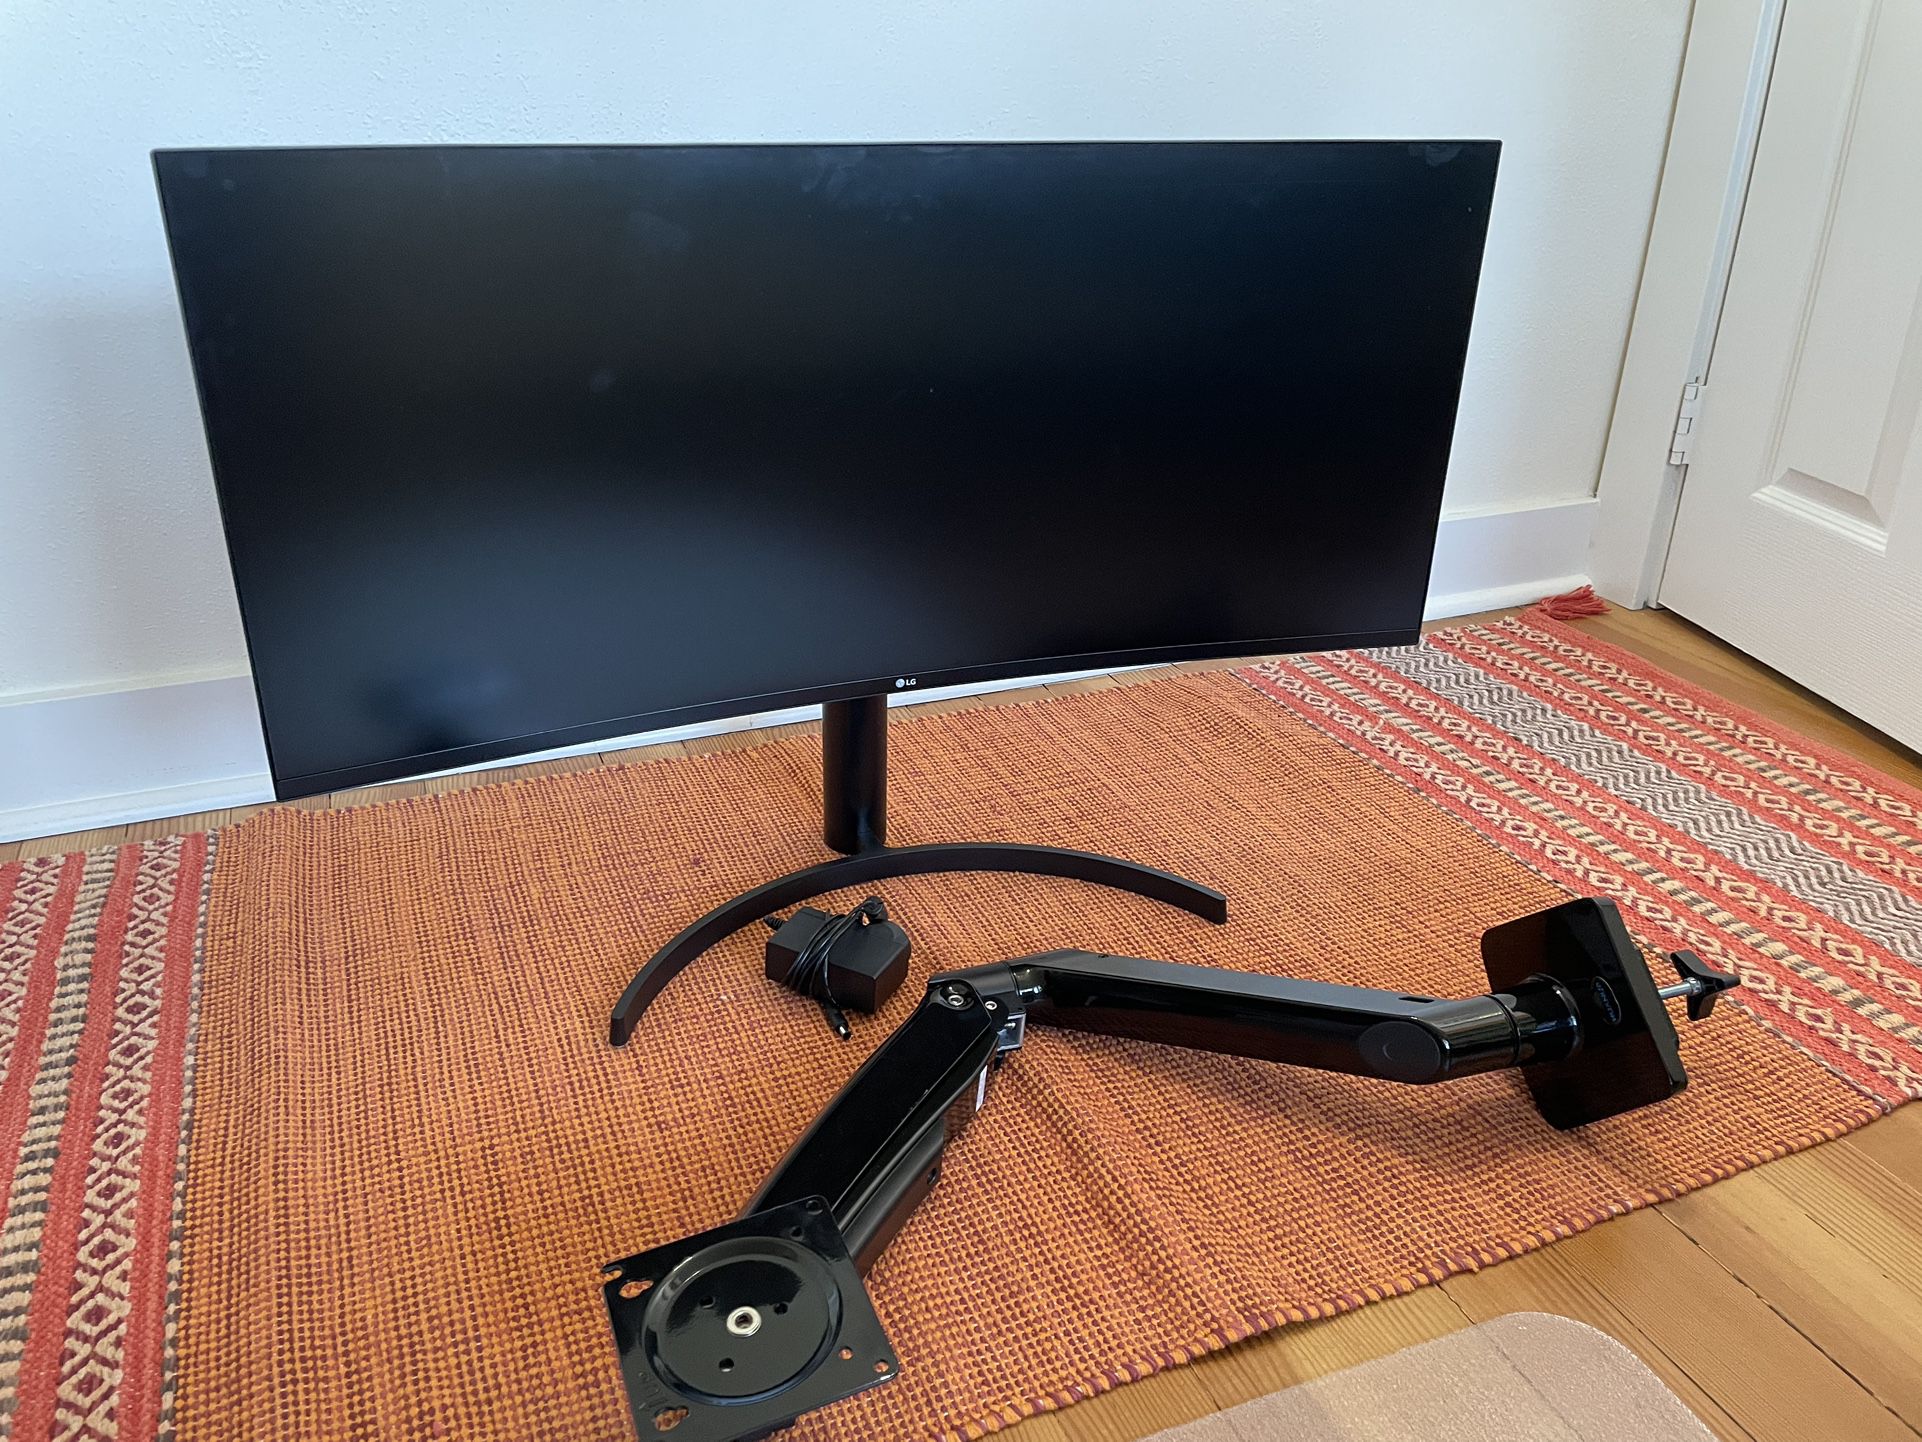 LG 35-inch Ultrawide Monitor With Arm!